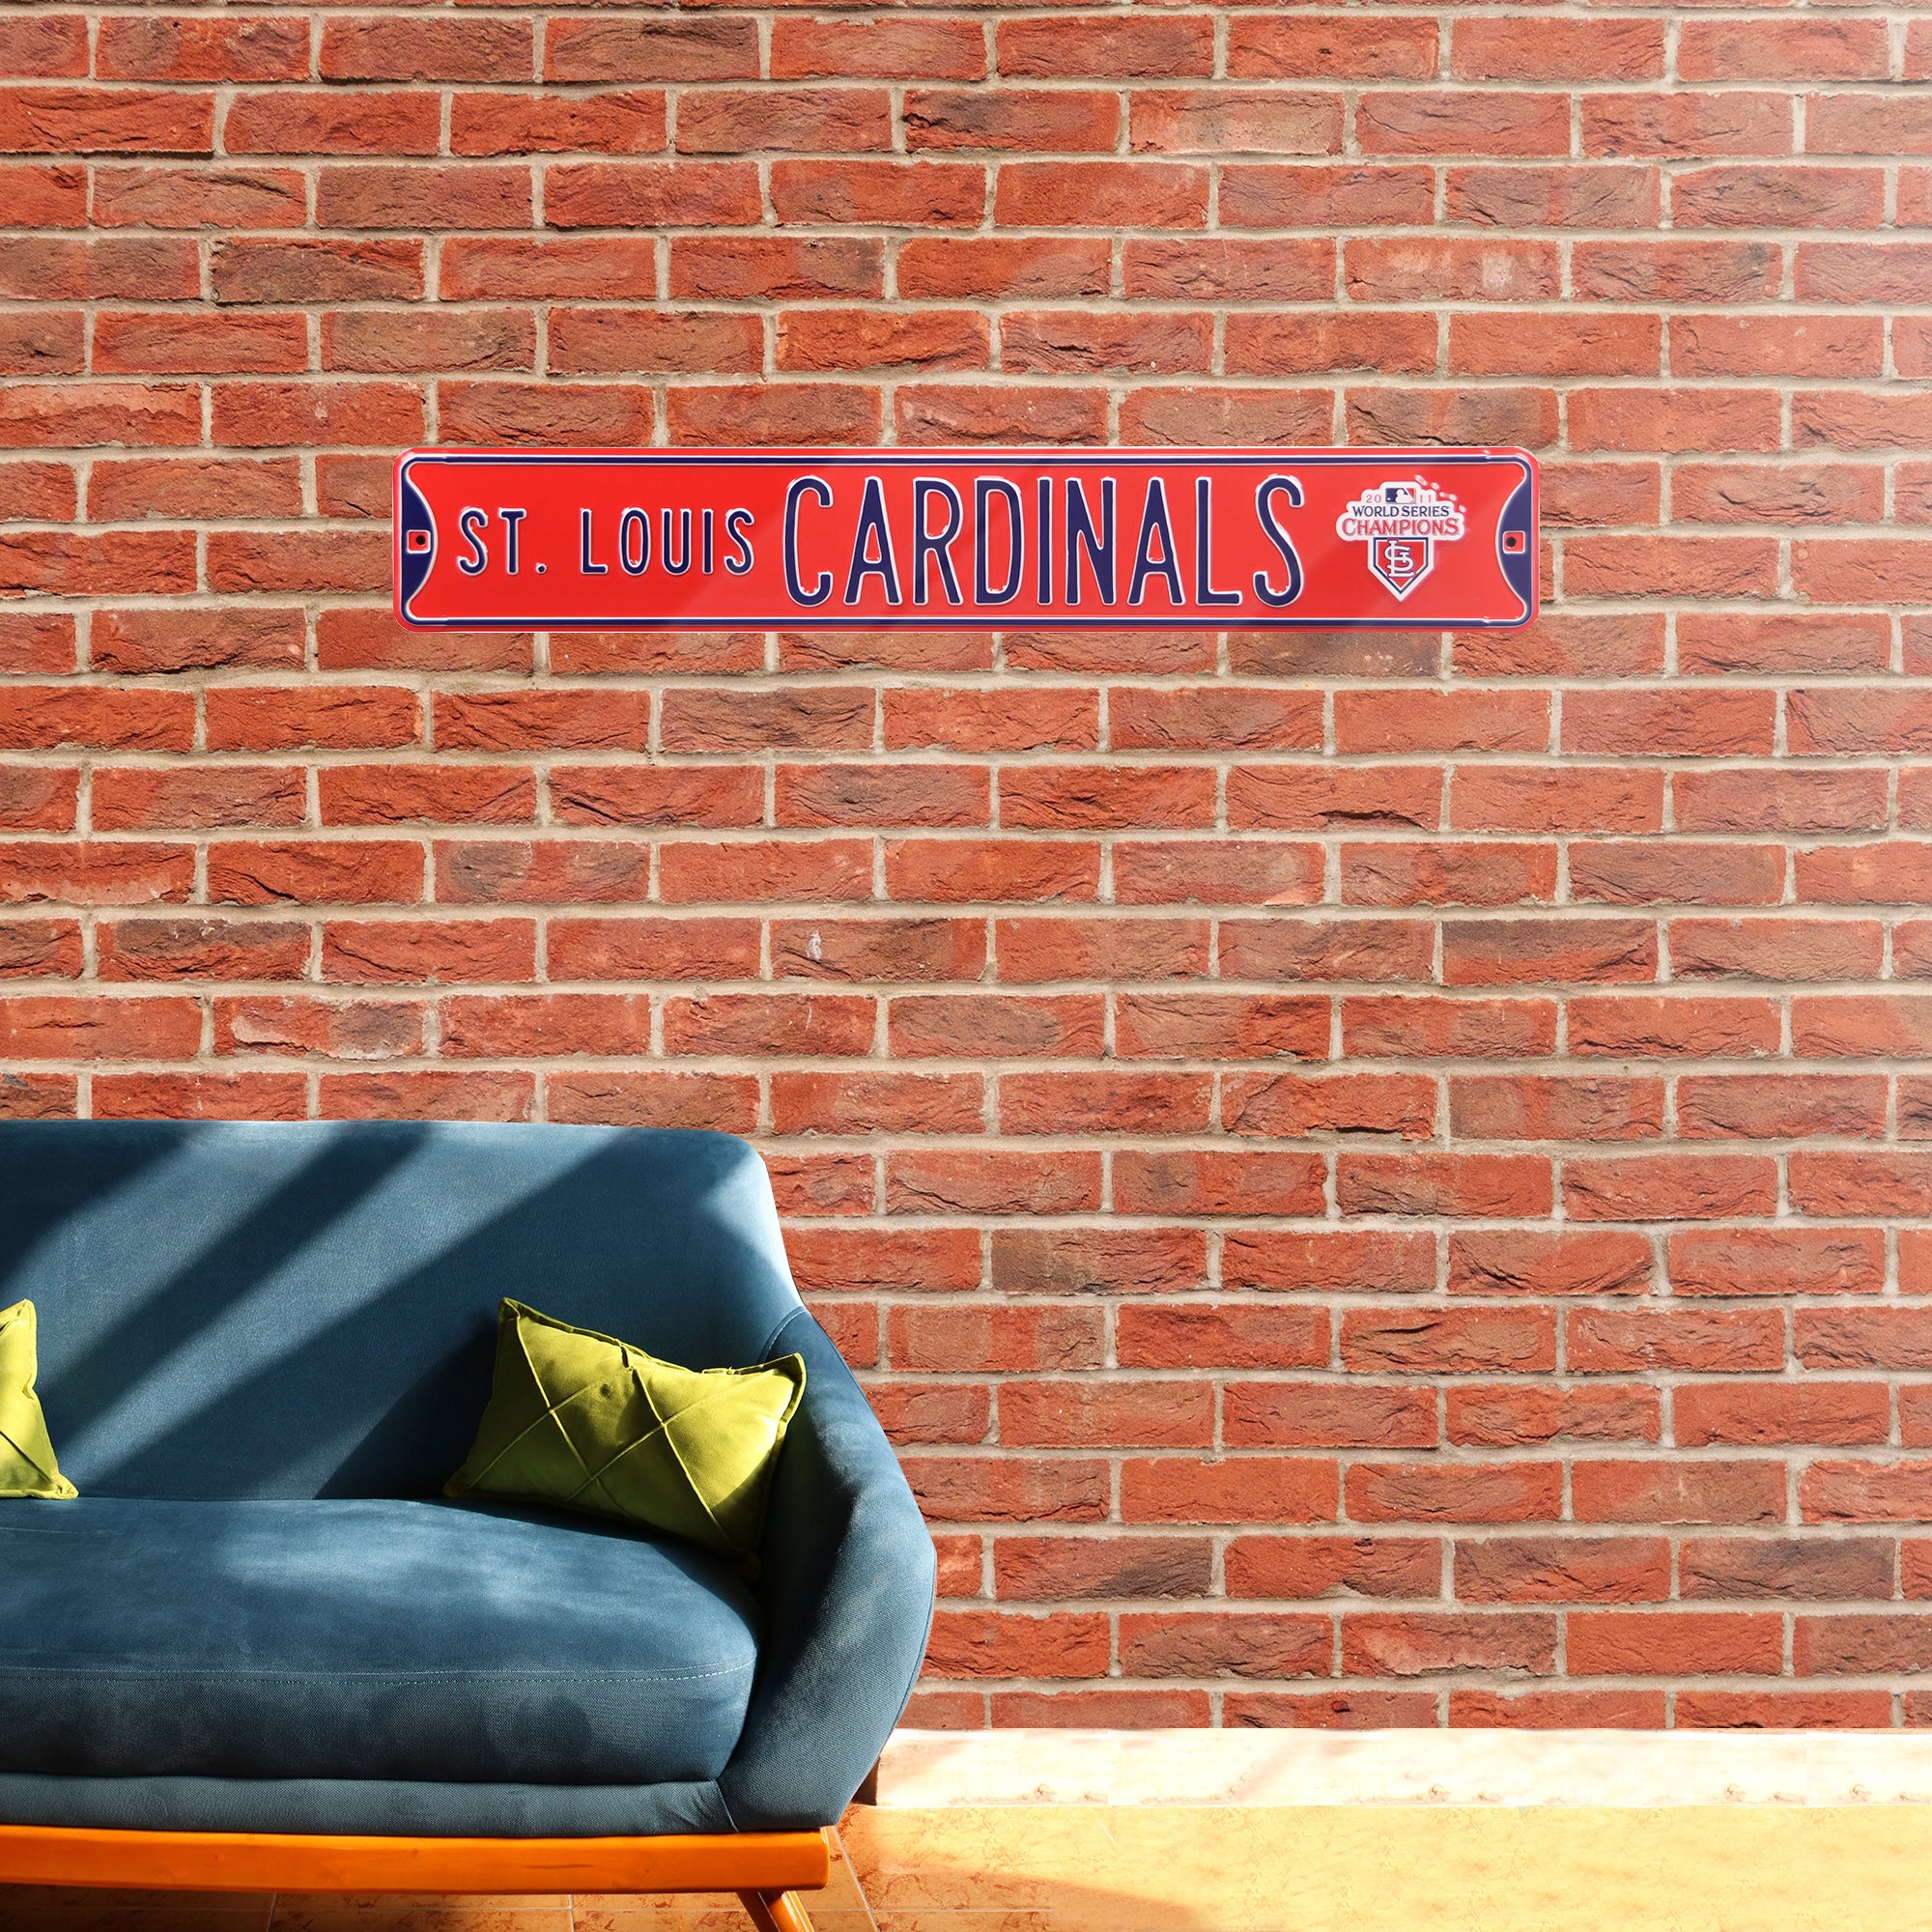 St Louis Cardinals Steel Street Sign with Logo-St Louis CARDINALS WS 2011 Logo 36" W x 6" H by Fathead